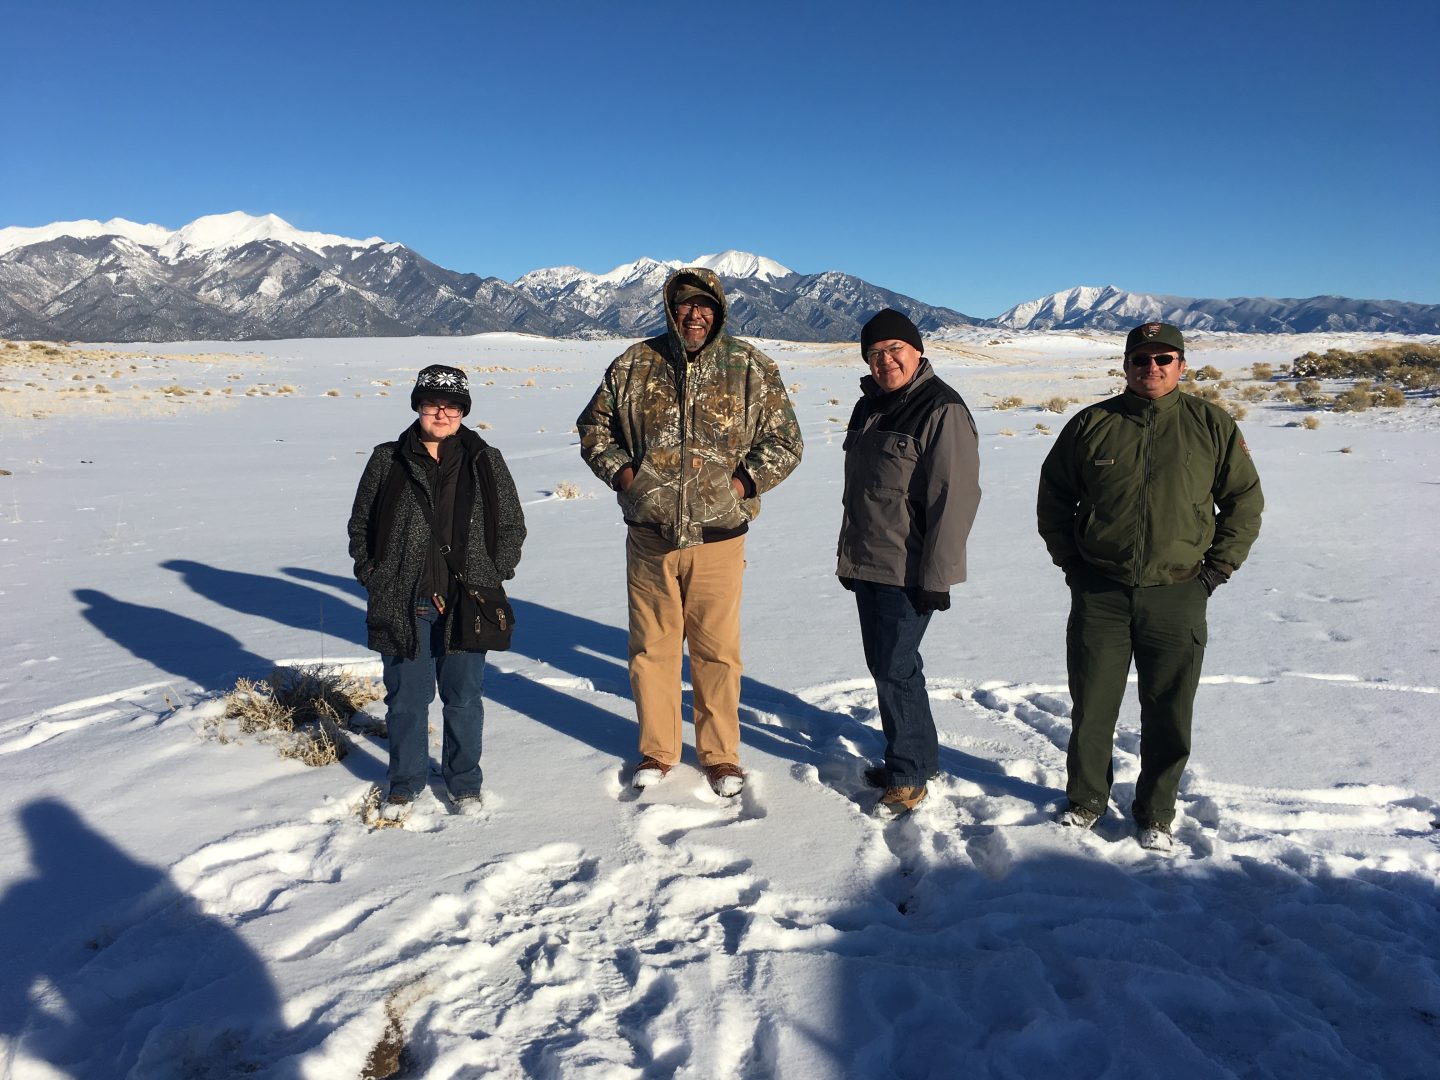 Tesuque Pueblo members stand with NPS staff in a remote desert area of the park in winter, with snow on the ground. In the distant background are snowy dunes and snow-capped mountains.